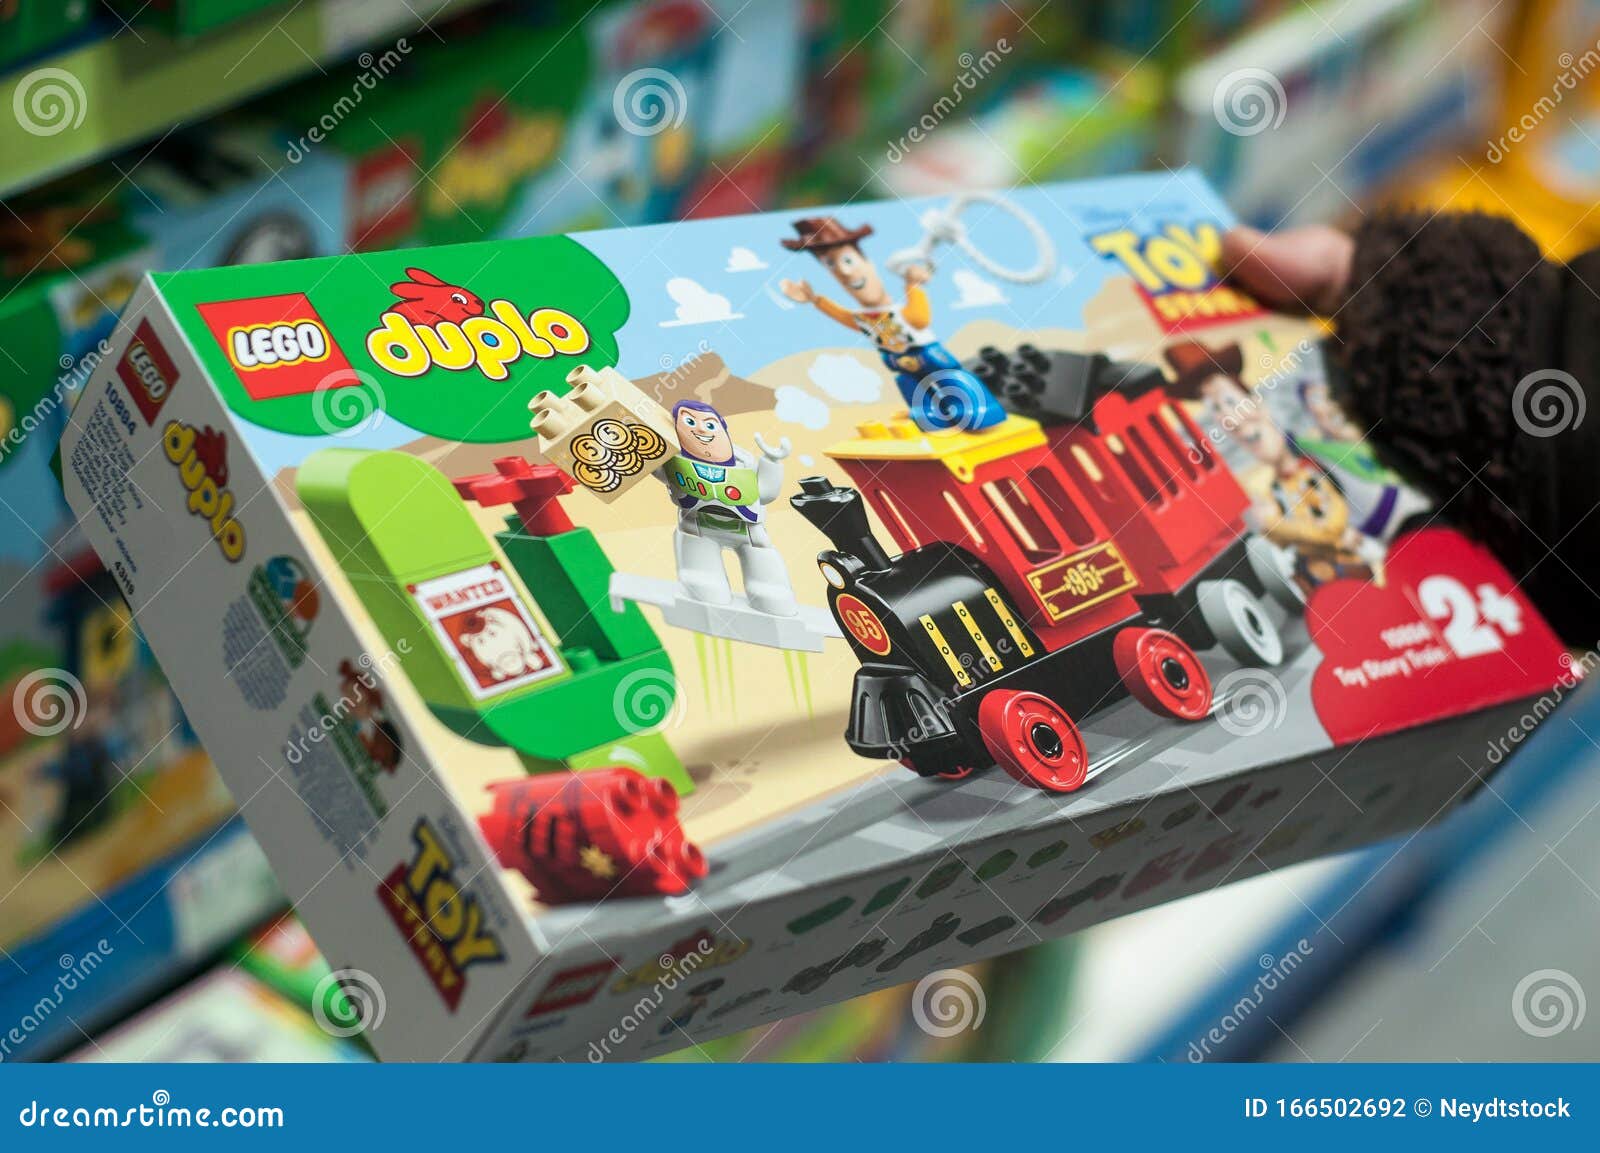 Toy Story Train by Lego Duplo in Hand of Woman in a Toy Store Supermarket Editorial Photography Image of business, colorful: 166502692